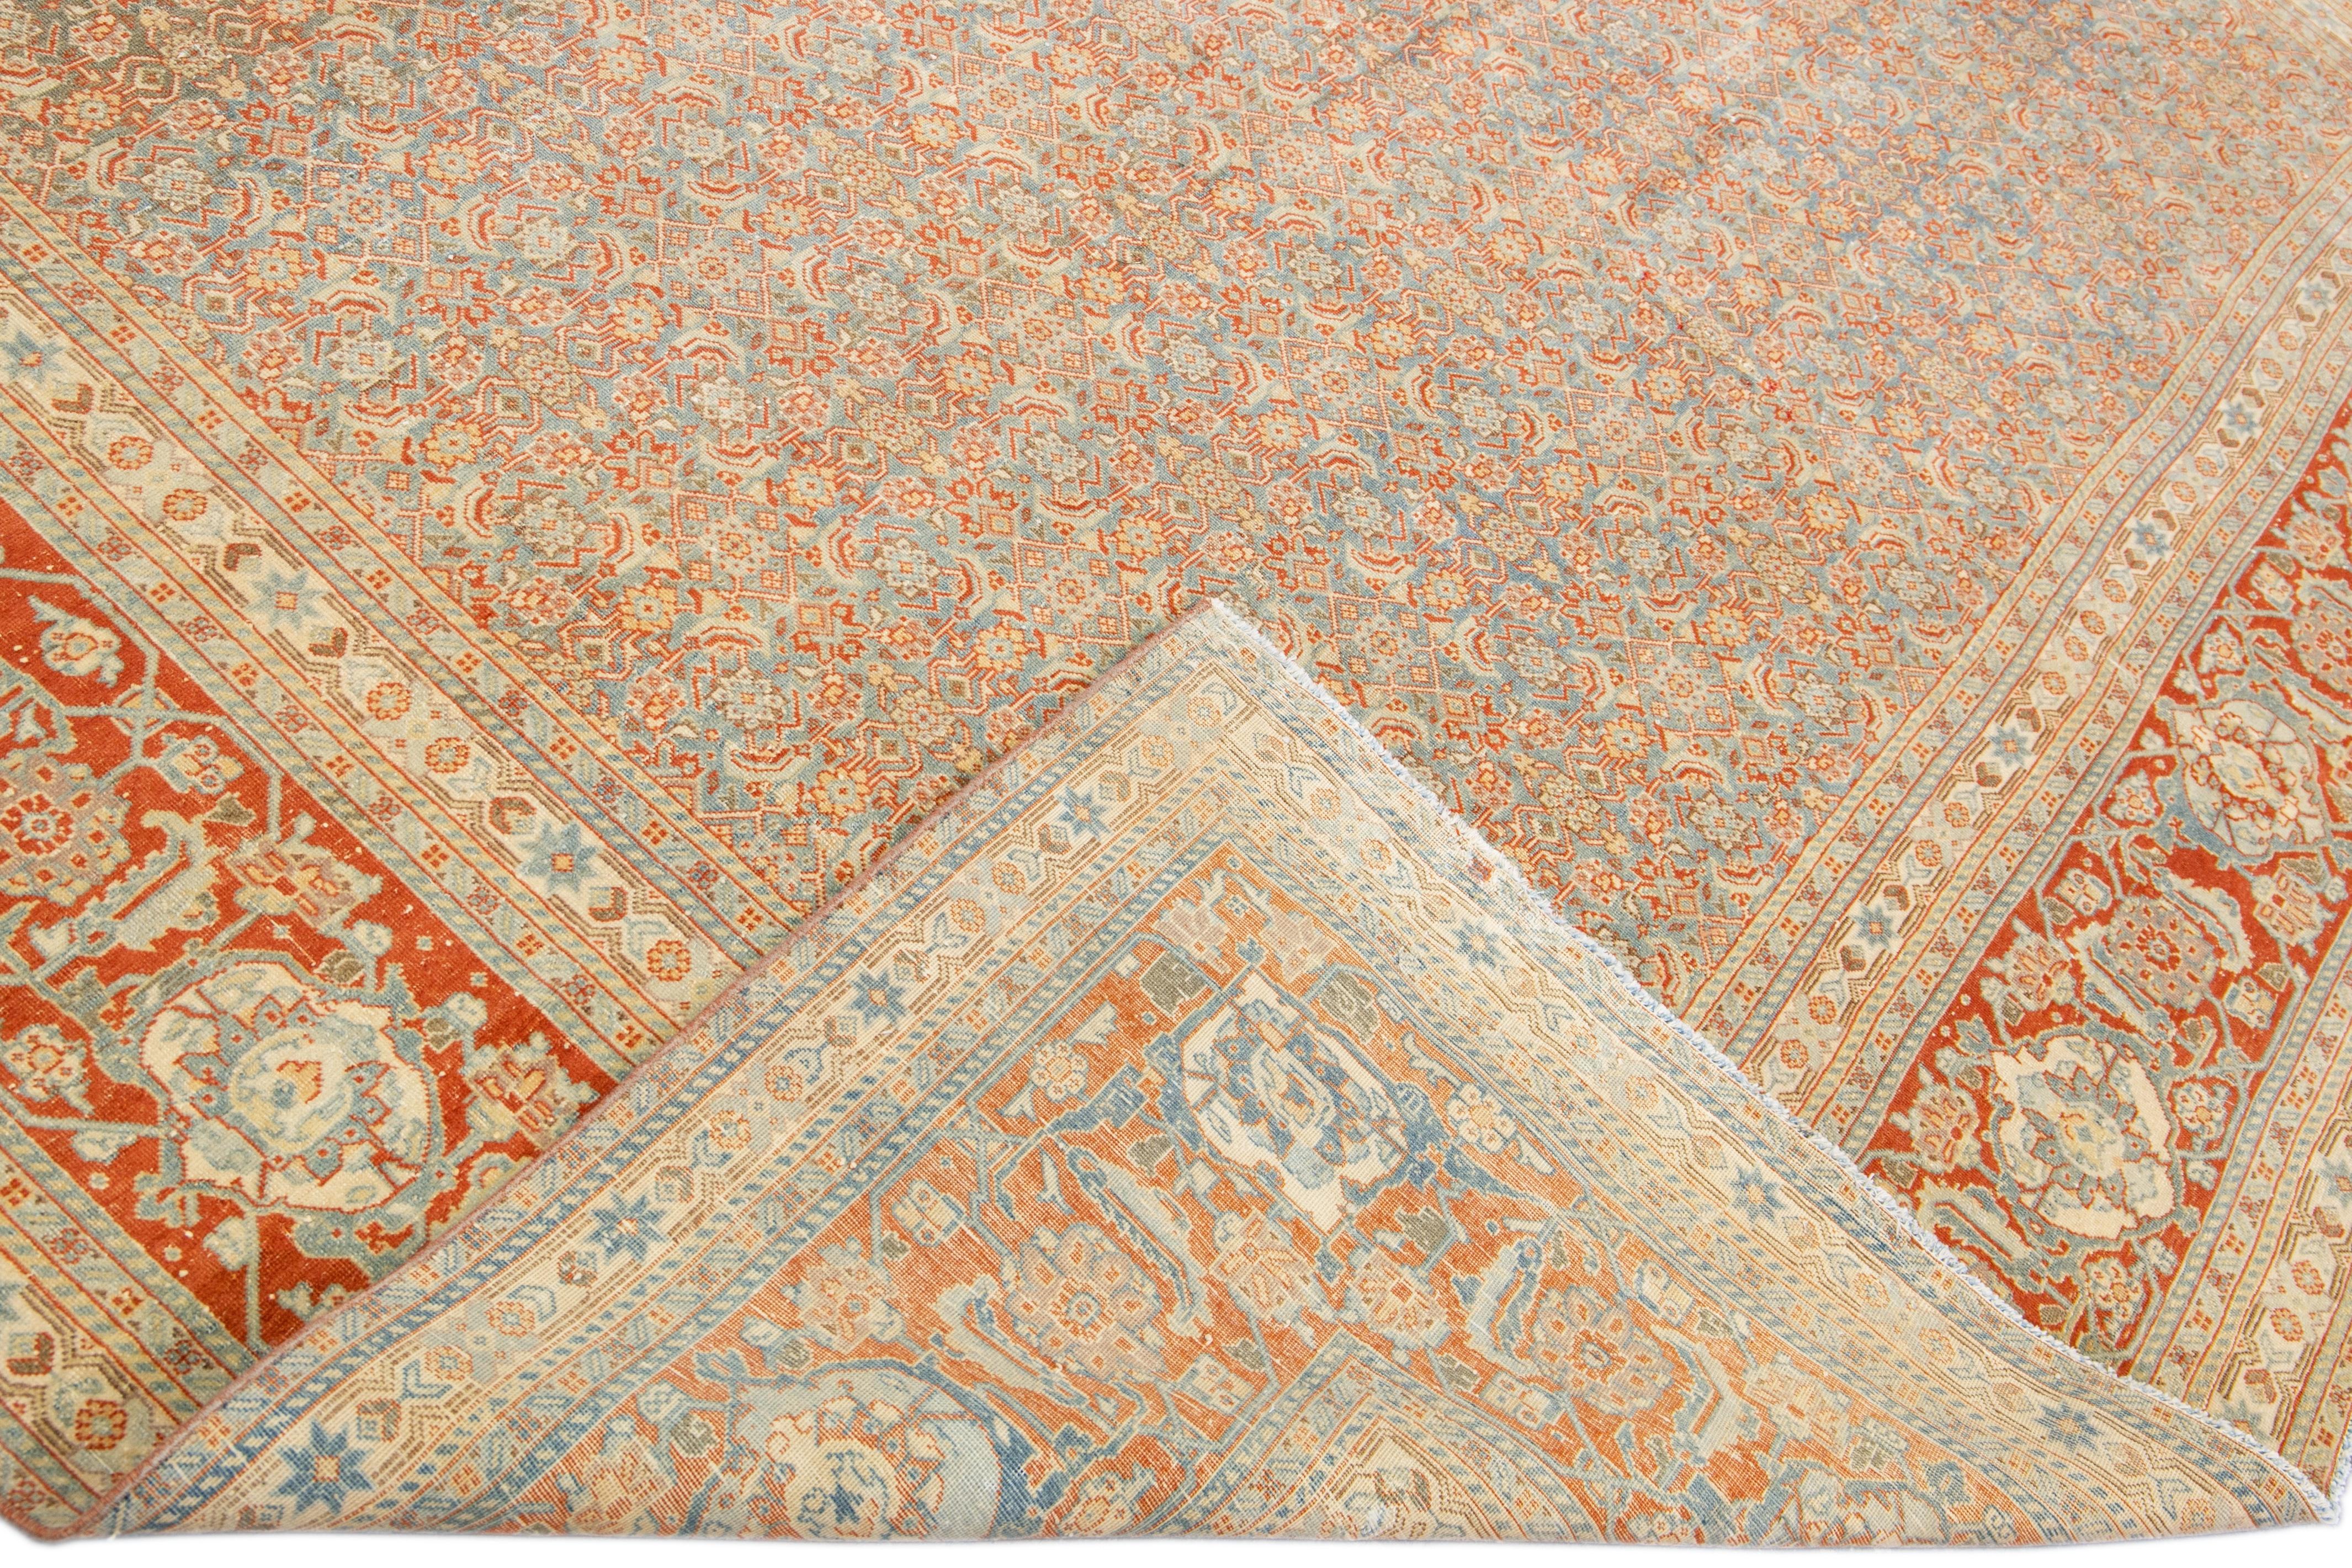 Beautiful antique Tabriz hand-knotted wool rug with the blue field. This Persian piece has a rusted designed frame and accents traditional in all-over geometric floral pattern design. 

This rug measures: 10' x 13'1